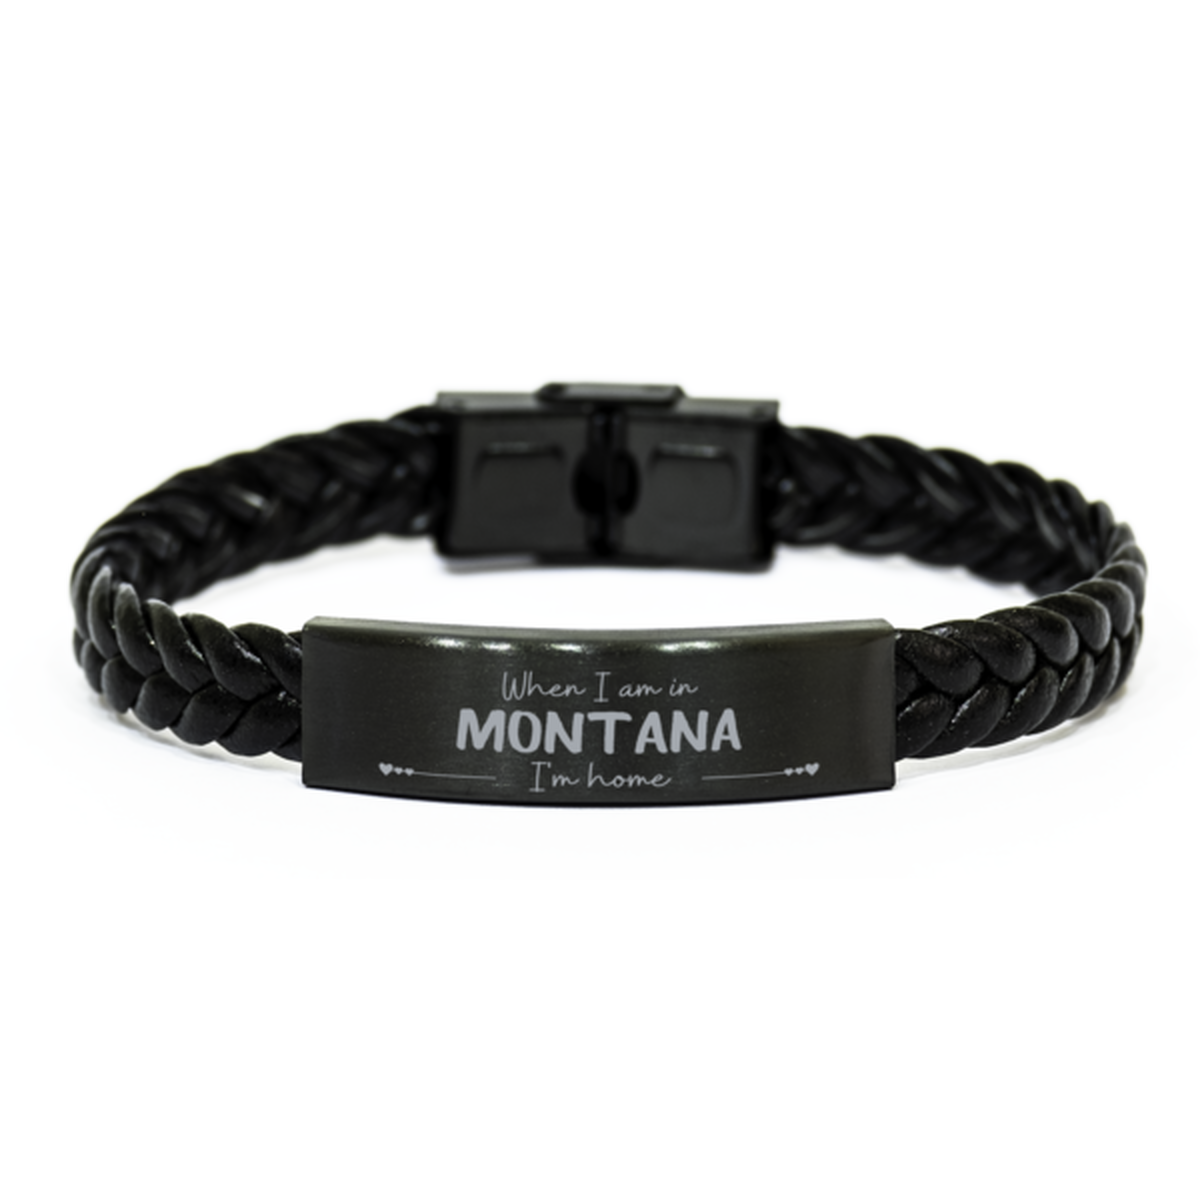 When I am in Montana I'm home Braided Leather Bracelet, Cheap Gifts For Montana, State Montana Birthday Gifts for Friends Coworker